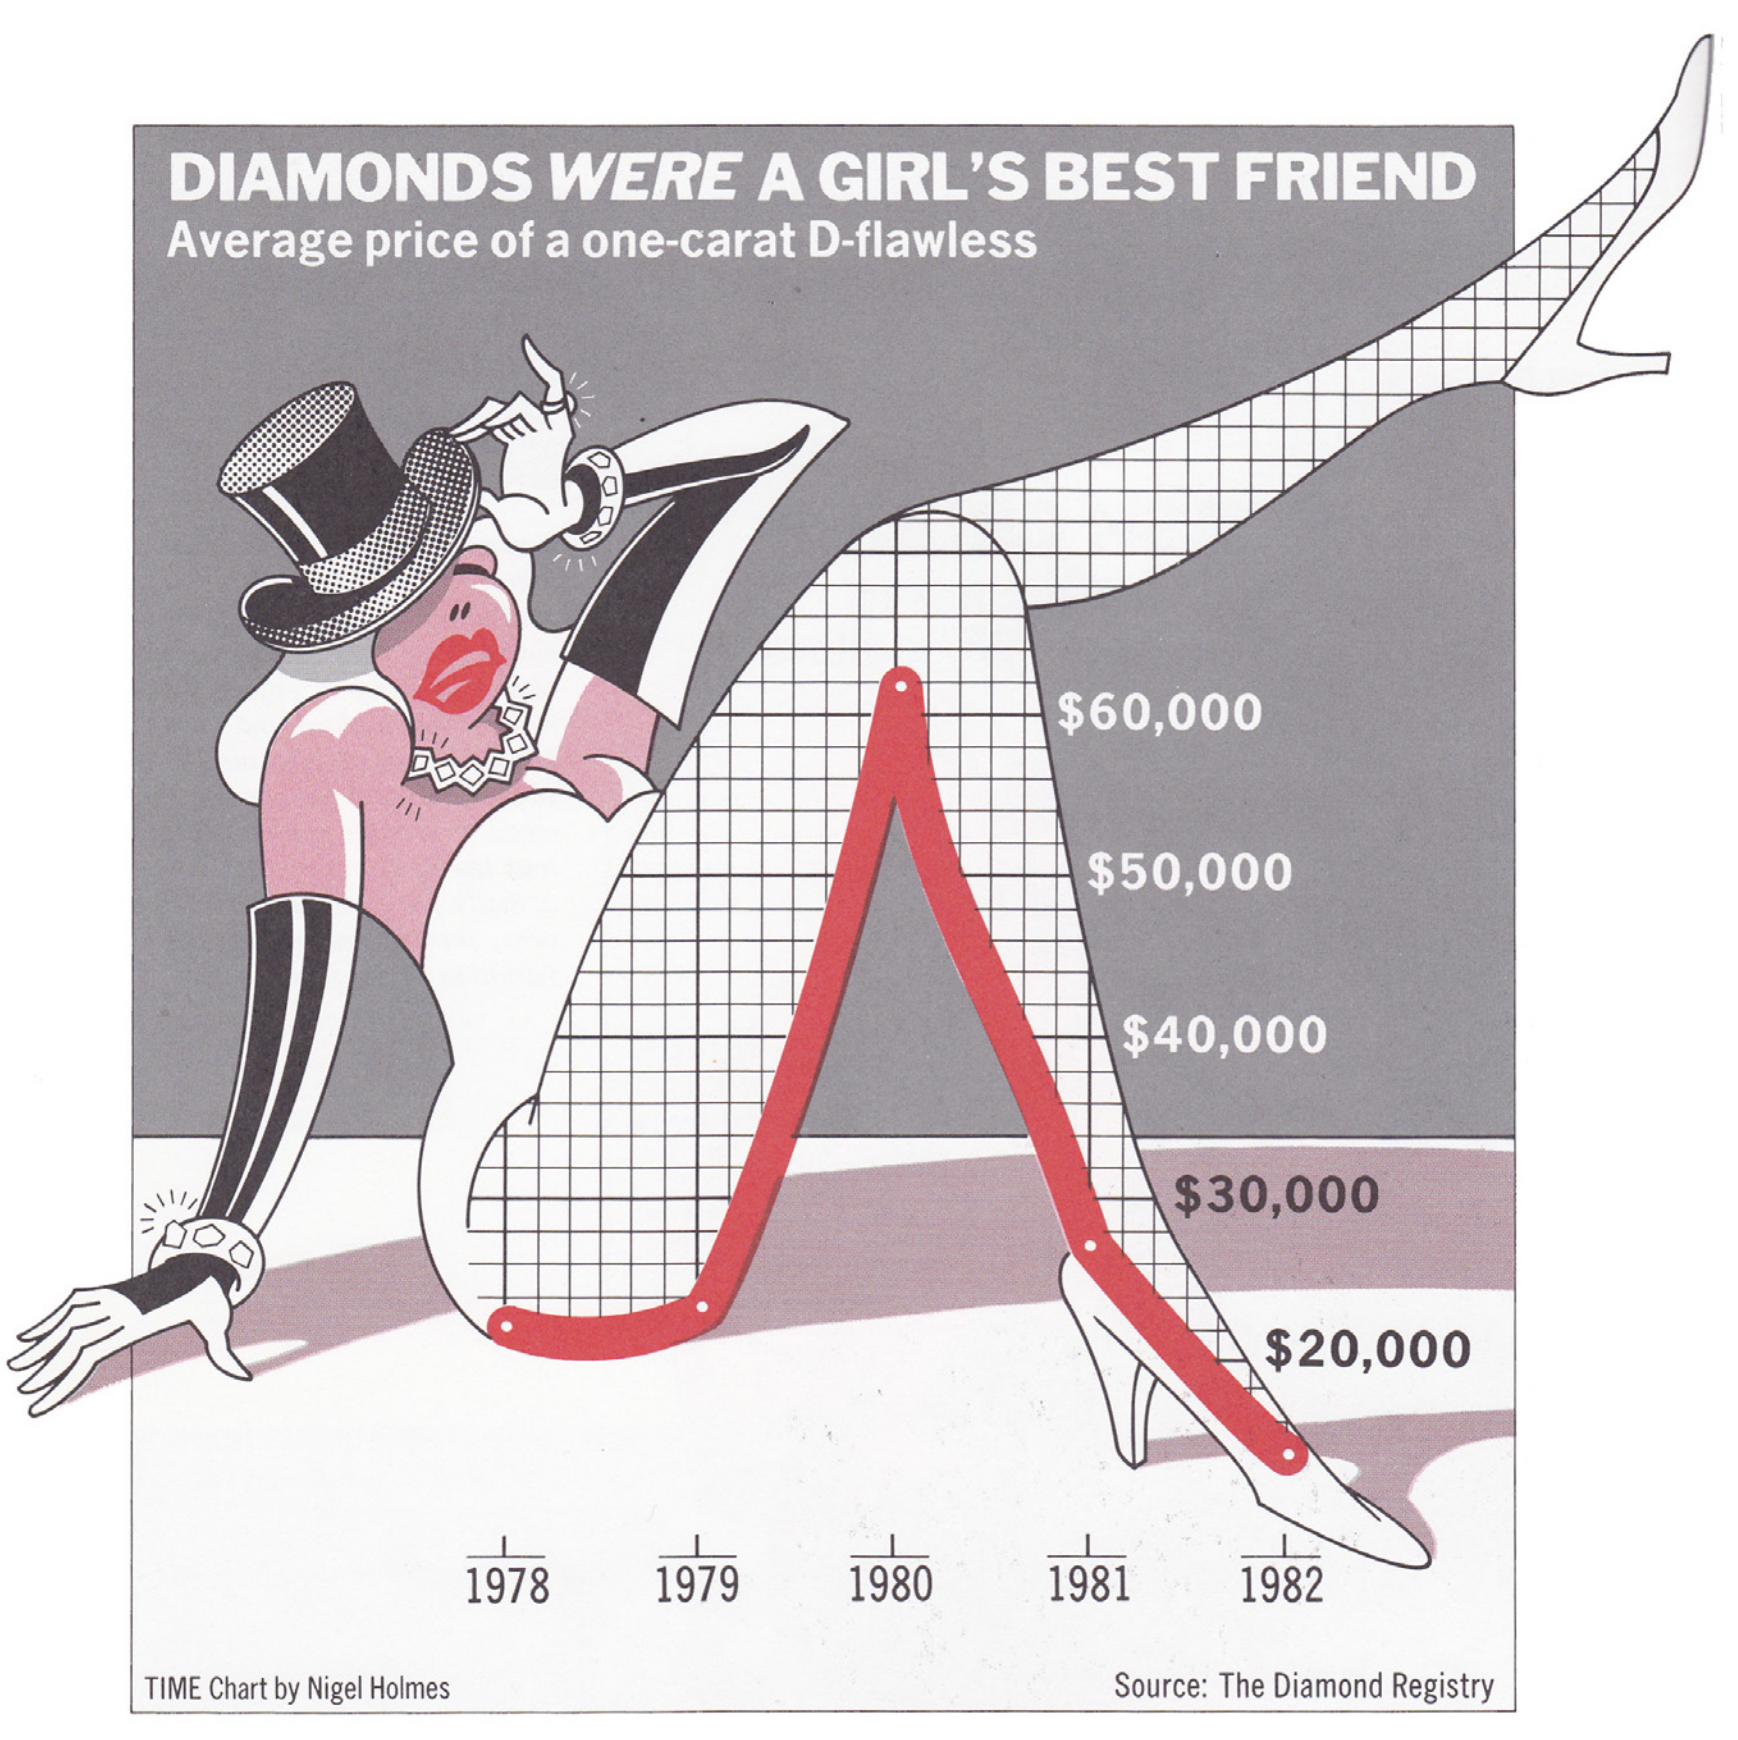 A line chart showing the average price of a one-carat D-flawless, titled 'Diamonds were a girl's best friend'. The line of the chart is drown as the bottom side of the leg of a drawn lady sitting on the ground.